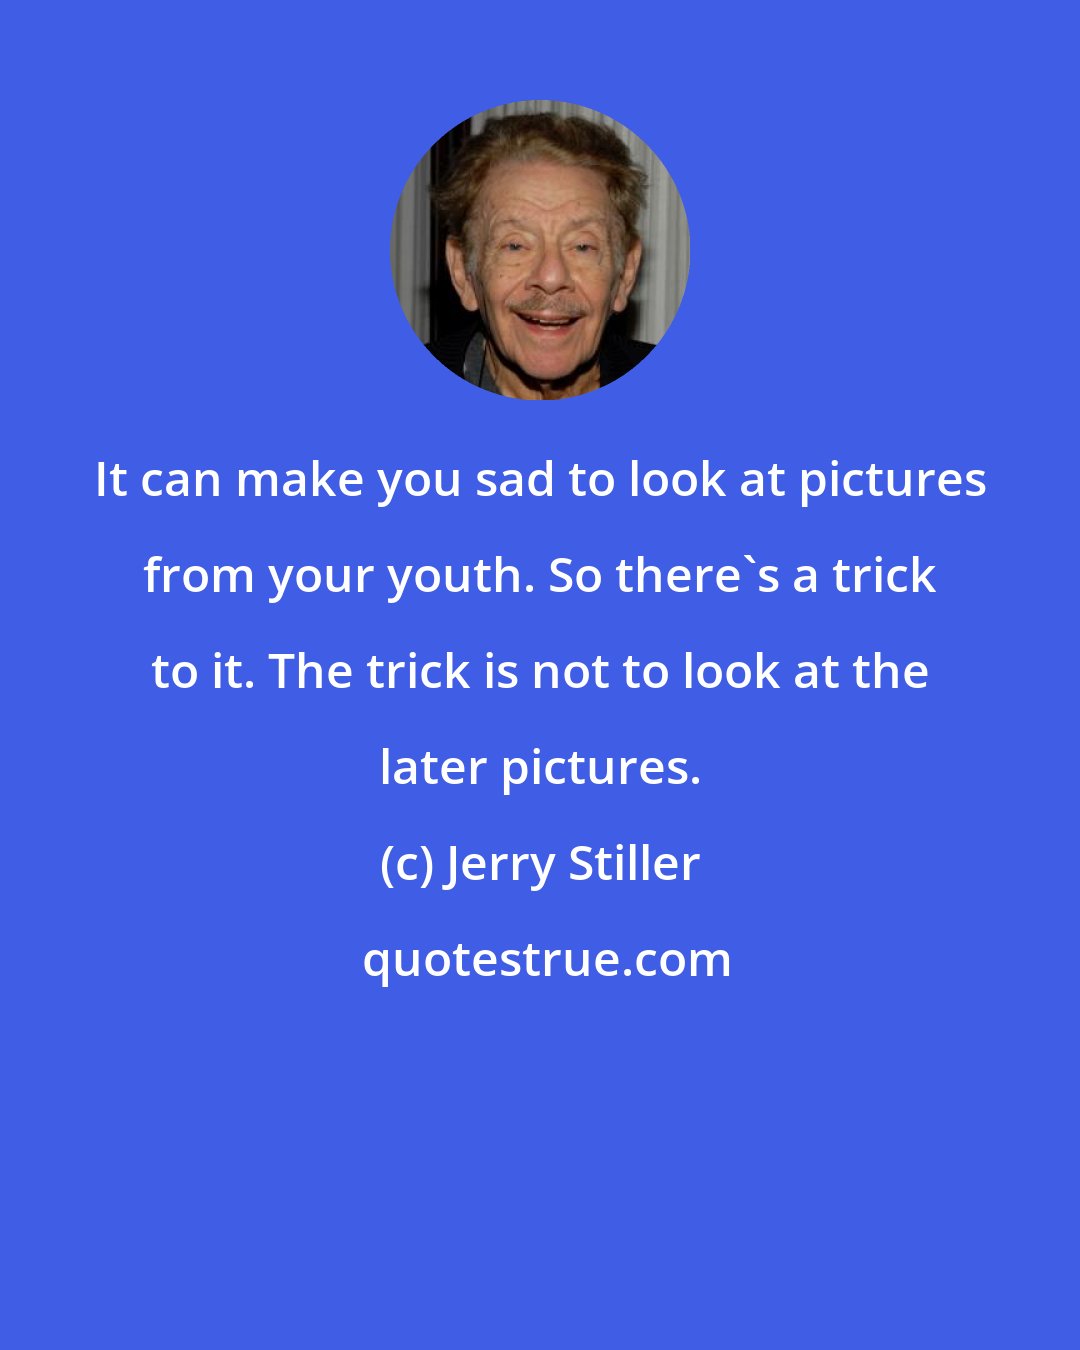 Jerry Stiller: It can make you sad to look at pictures from your youth. So there's a trick to it. The trick is not to look at the later pictures.